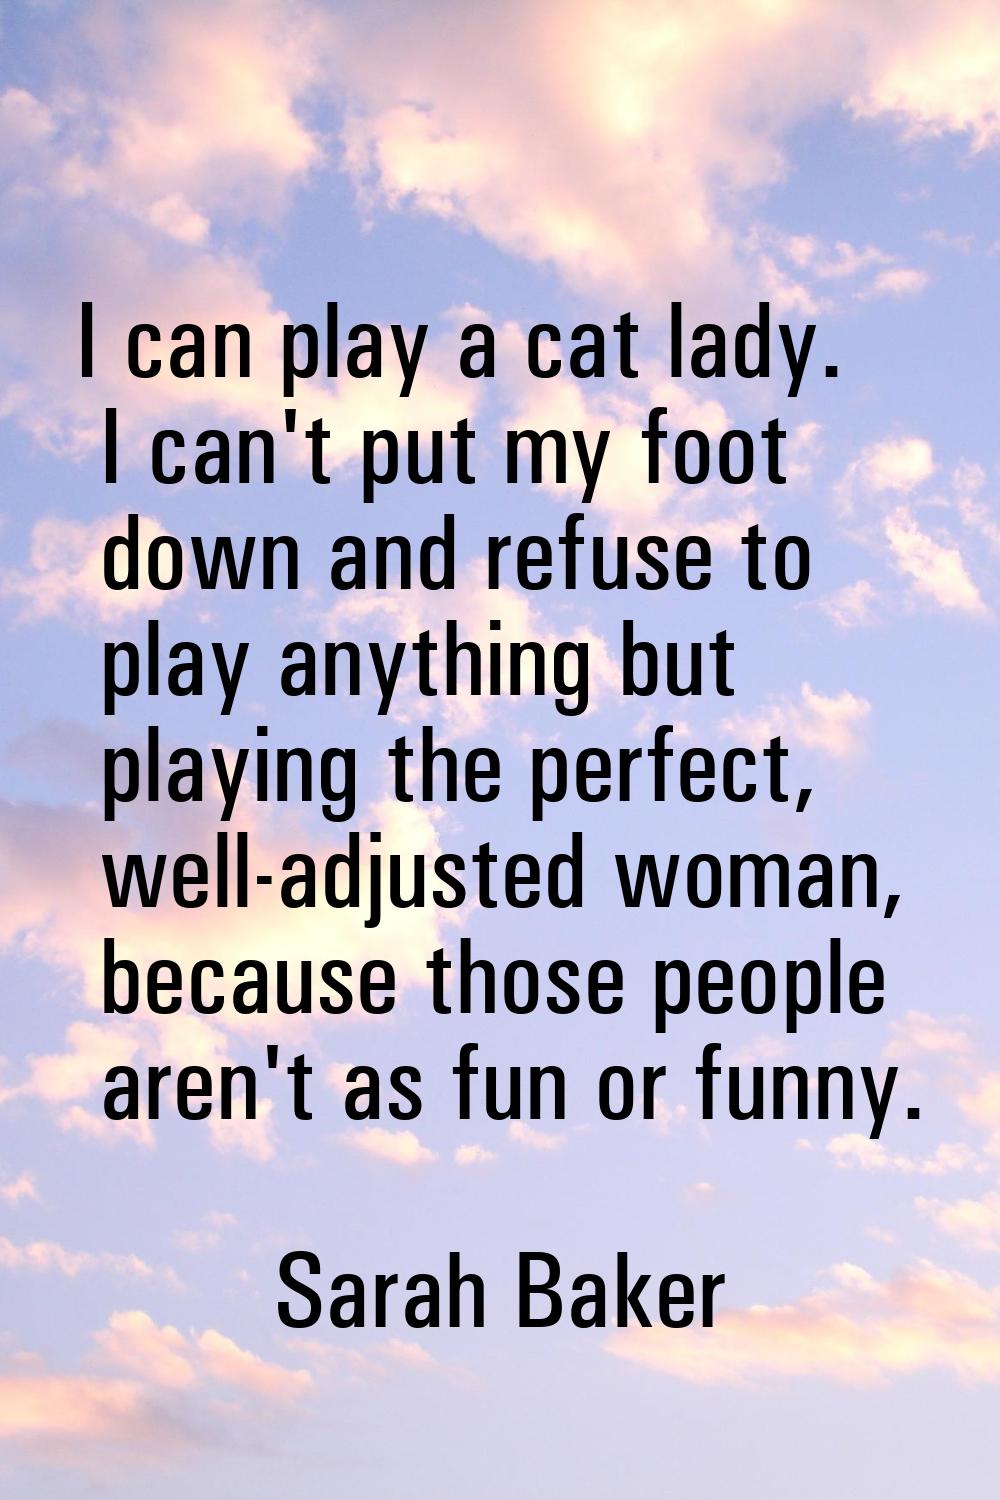 I can play a cat lady. I can't put my foot down and refuse to play anything but playing the perfect